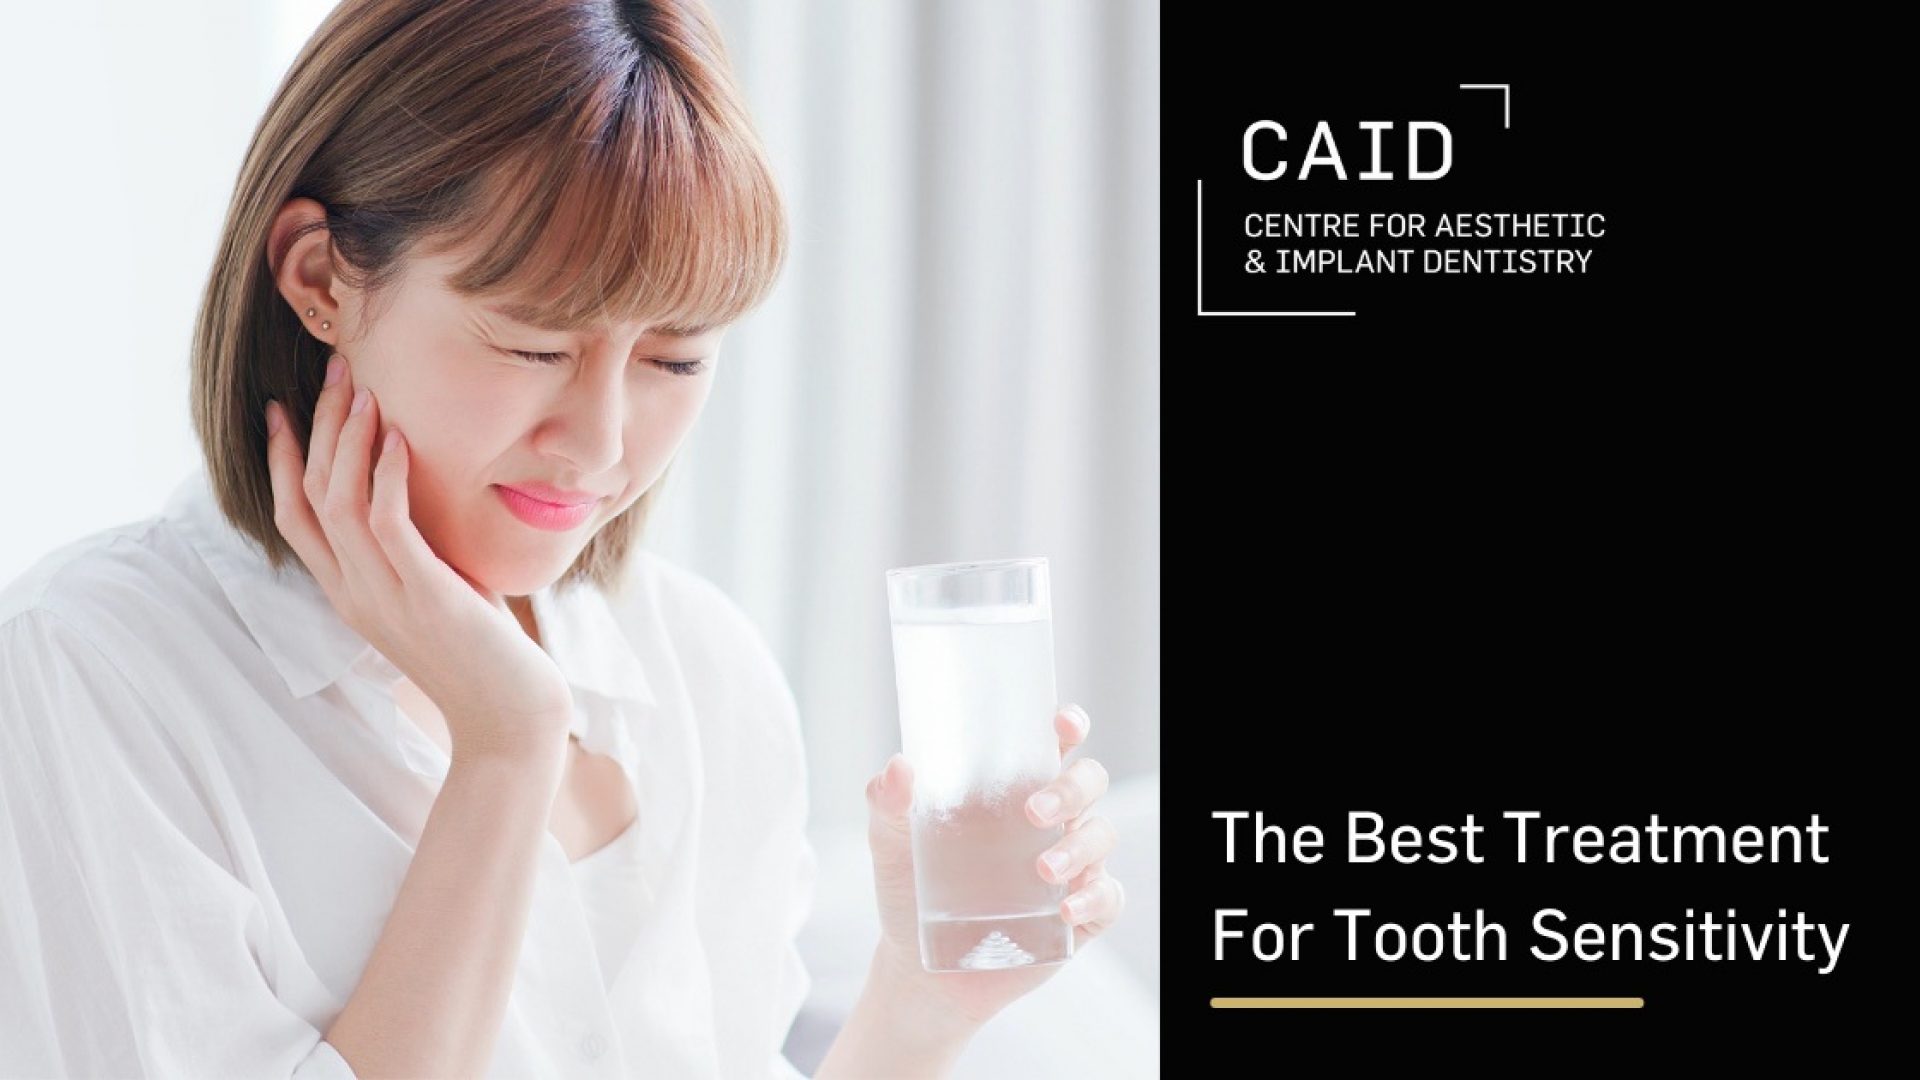 The Best Treatments for Tooth Sensitivity